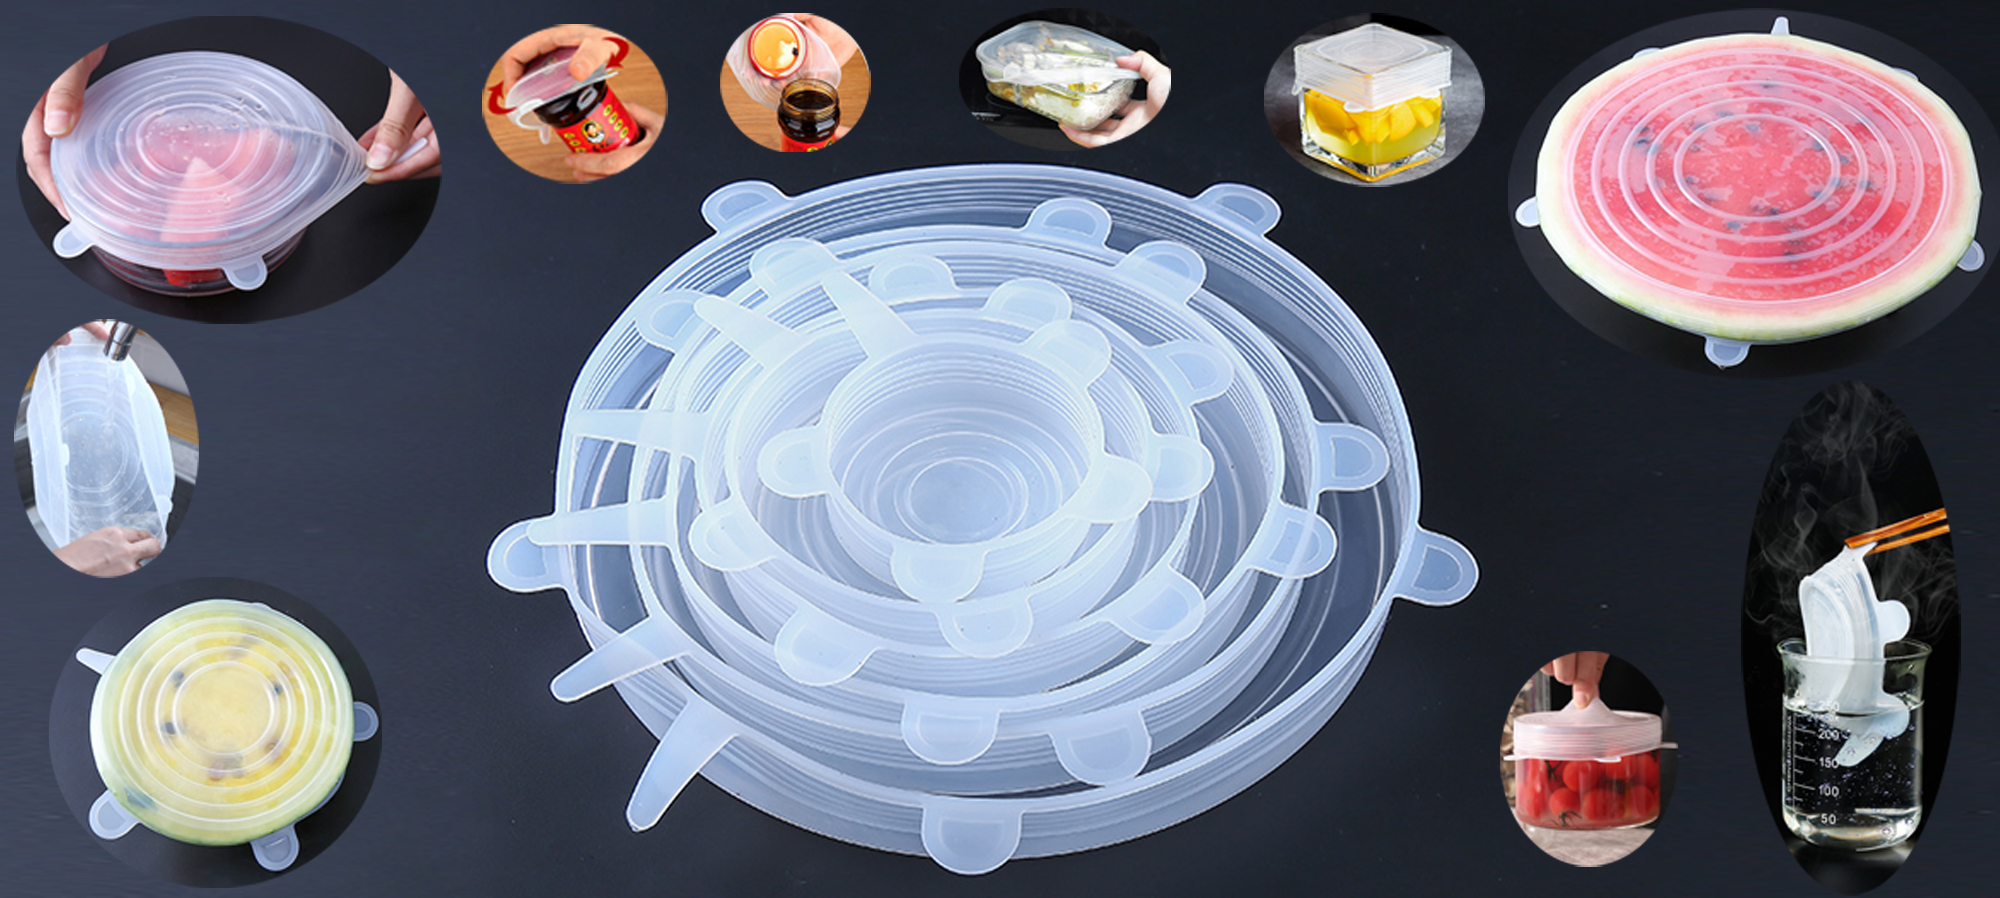 Silicone Food Covers